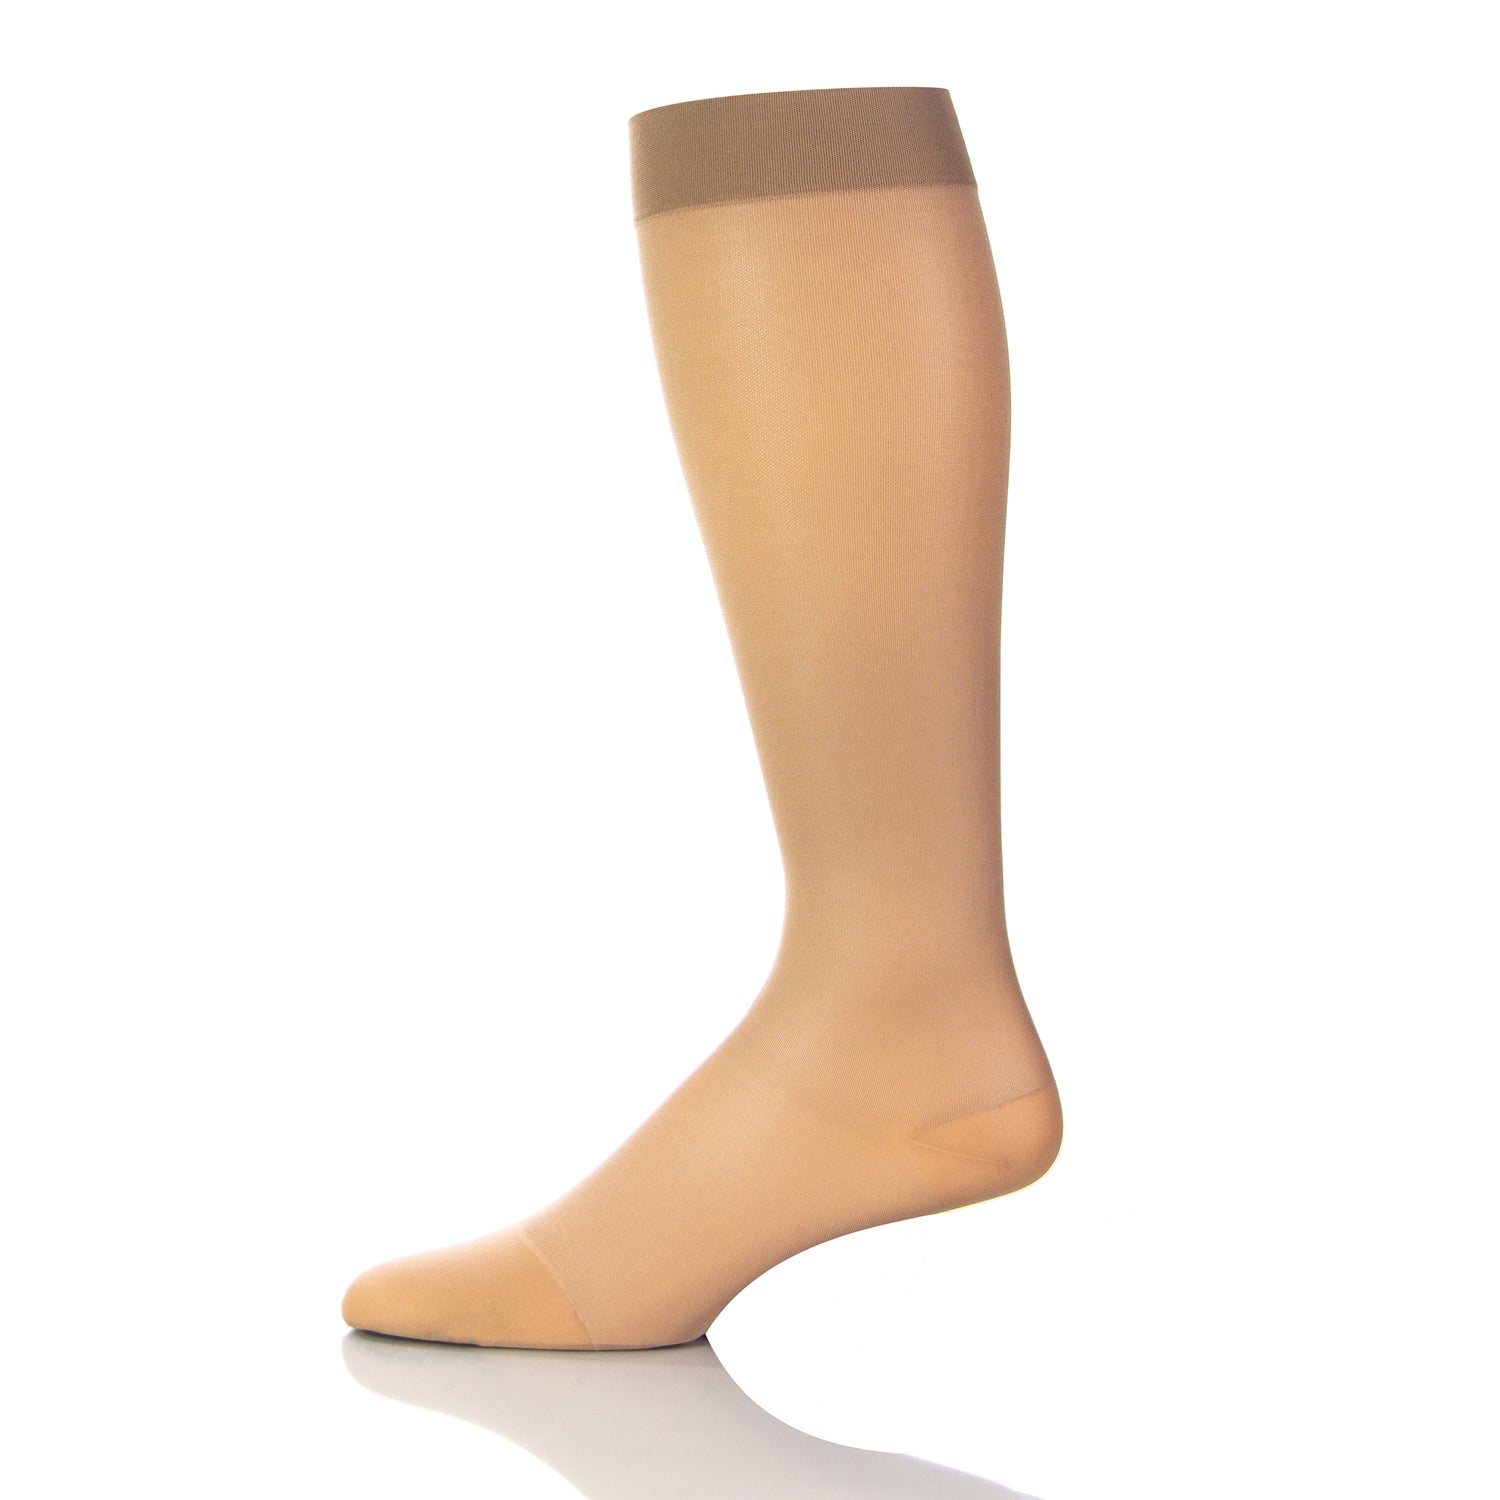 Thigh High 20-30mmHg Medical Compression Stockings Socks Mens and Women's  S-4XL